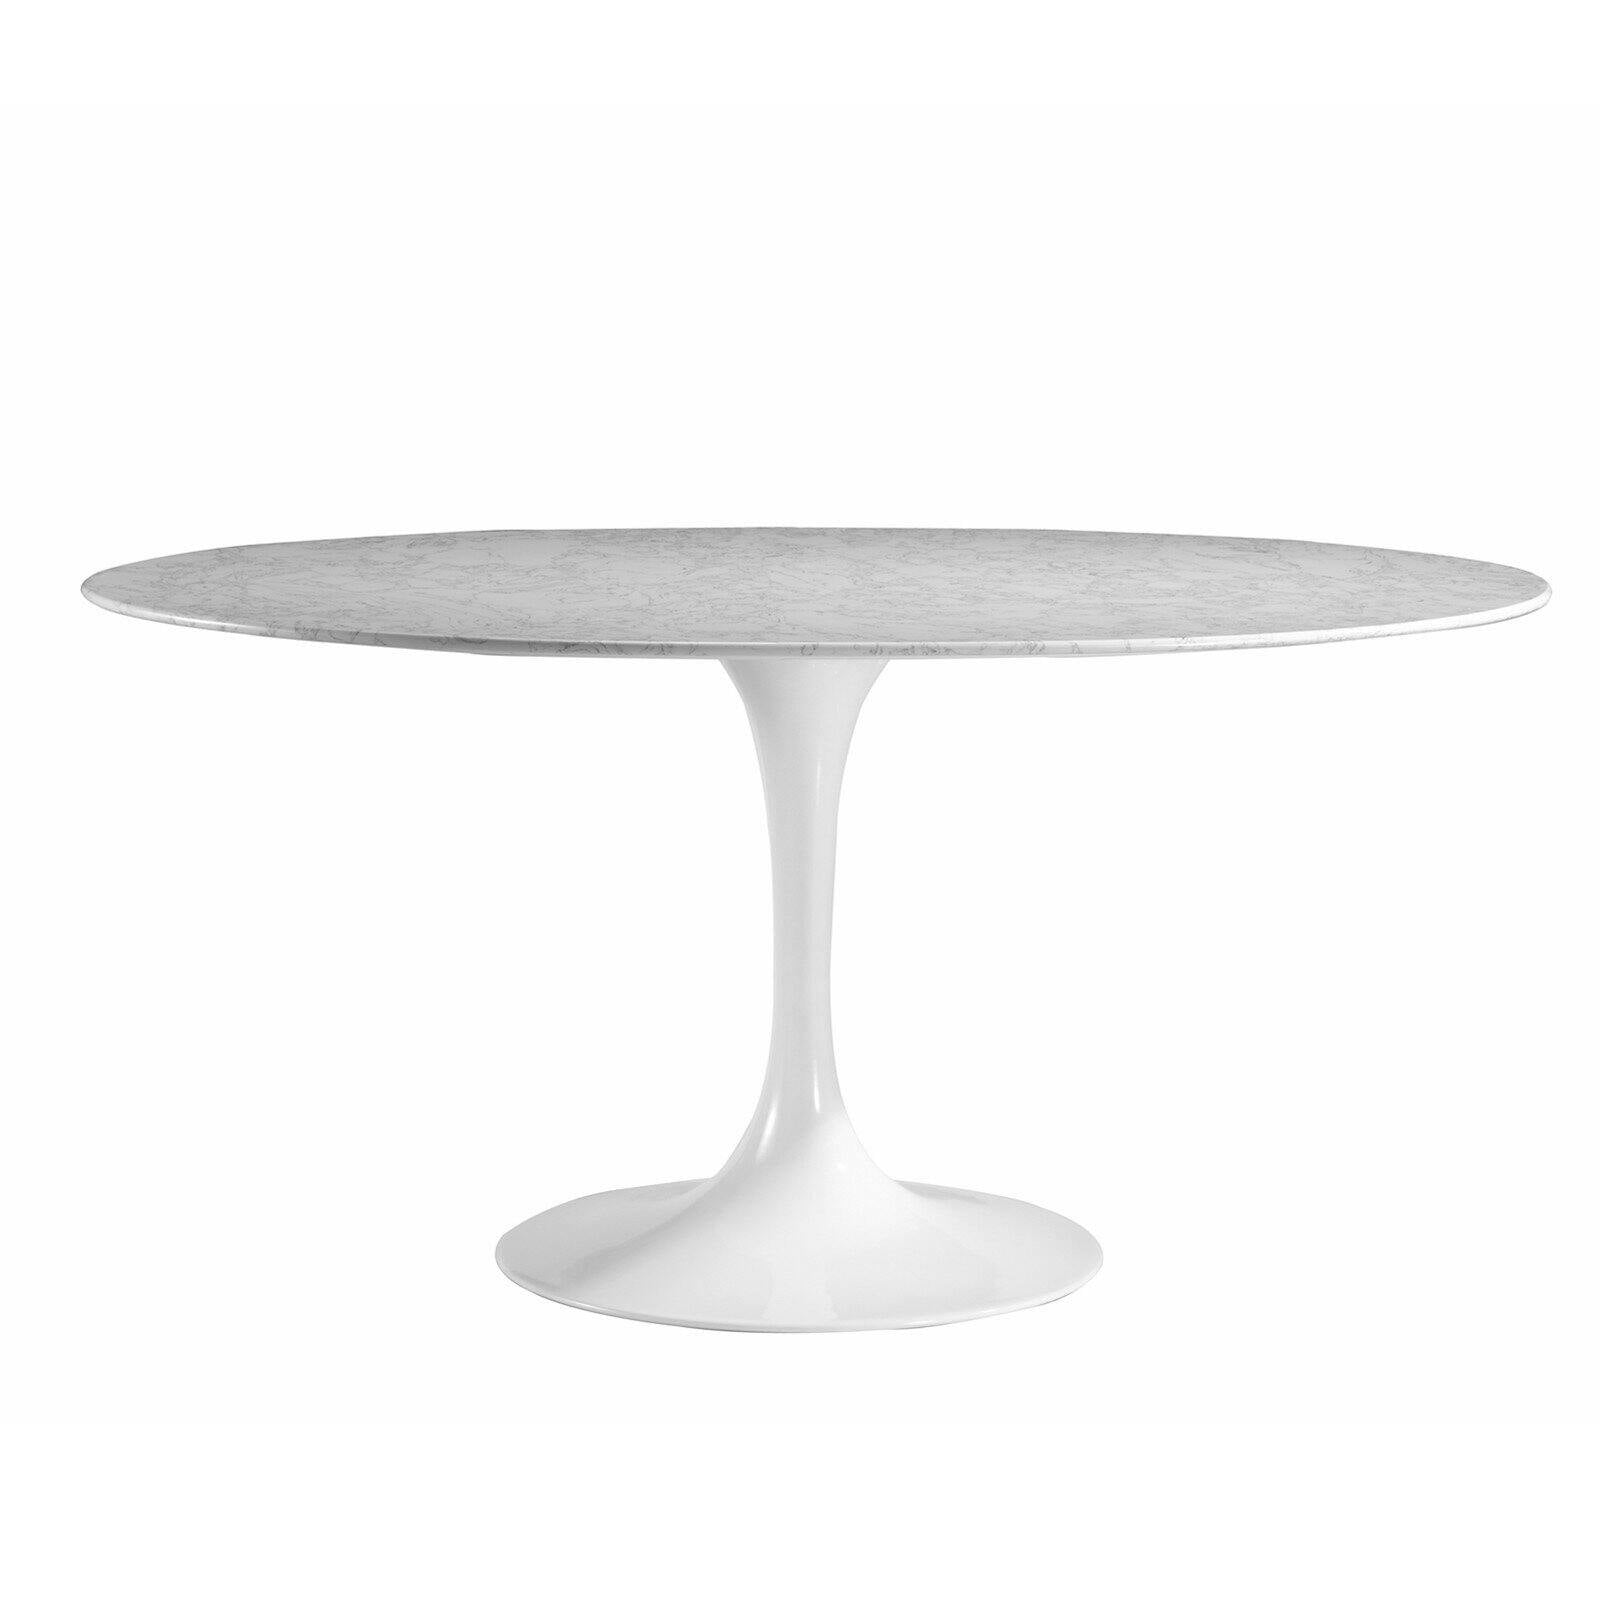 Daisy 48" Artificial Marble Dining Table in White EdgeMod Furniture 